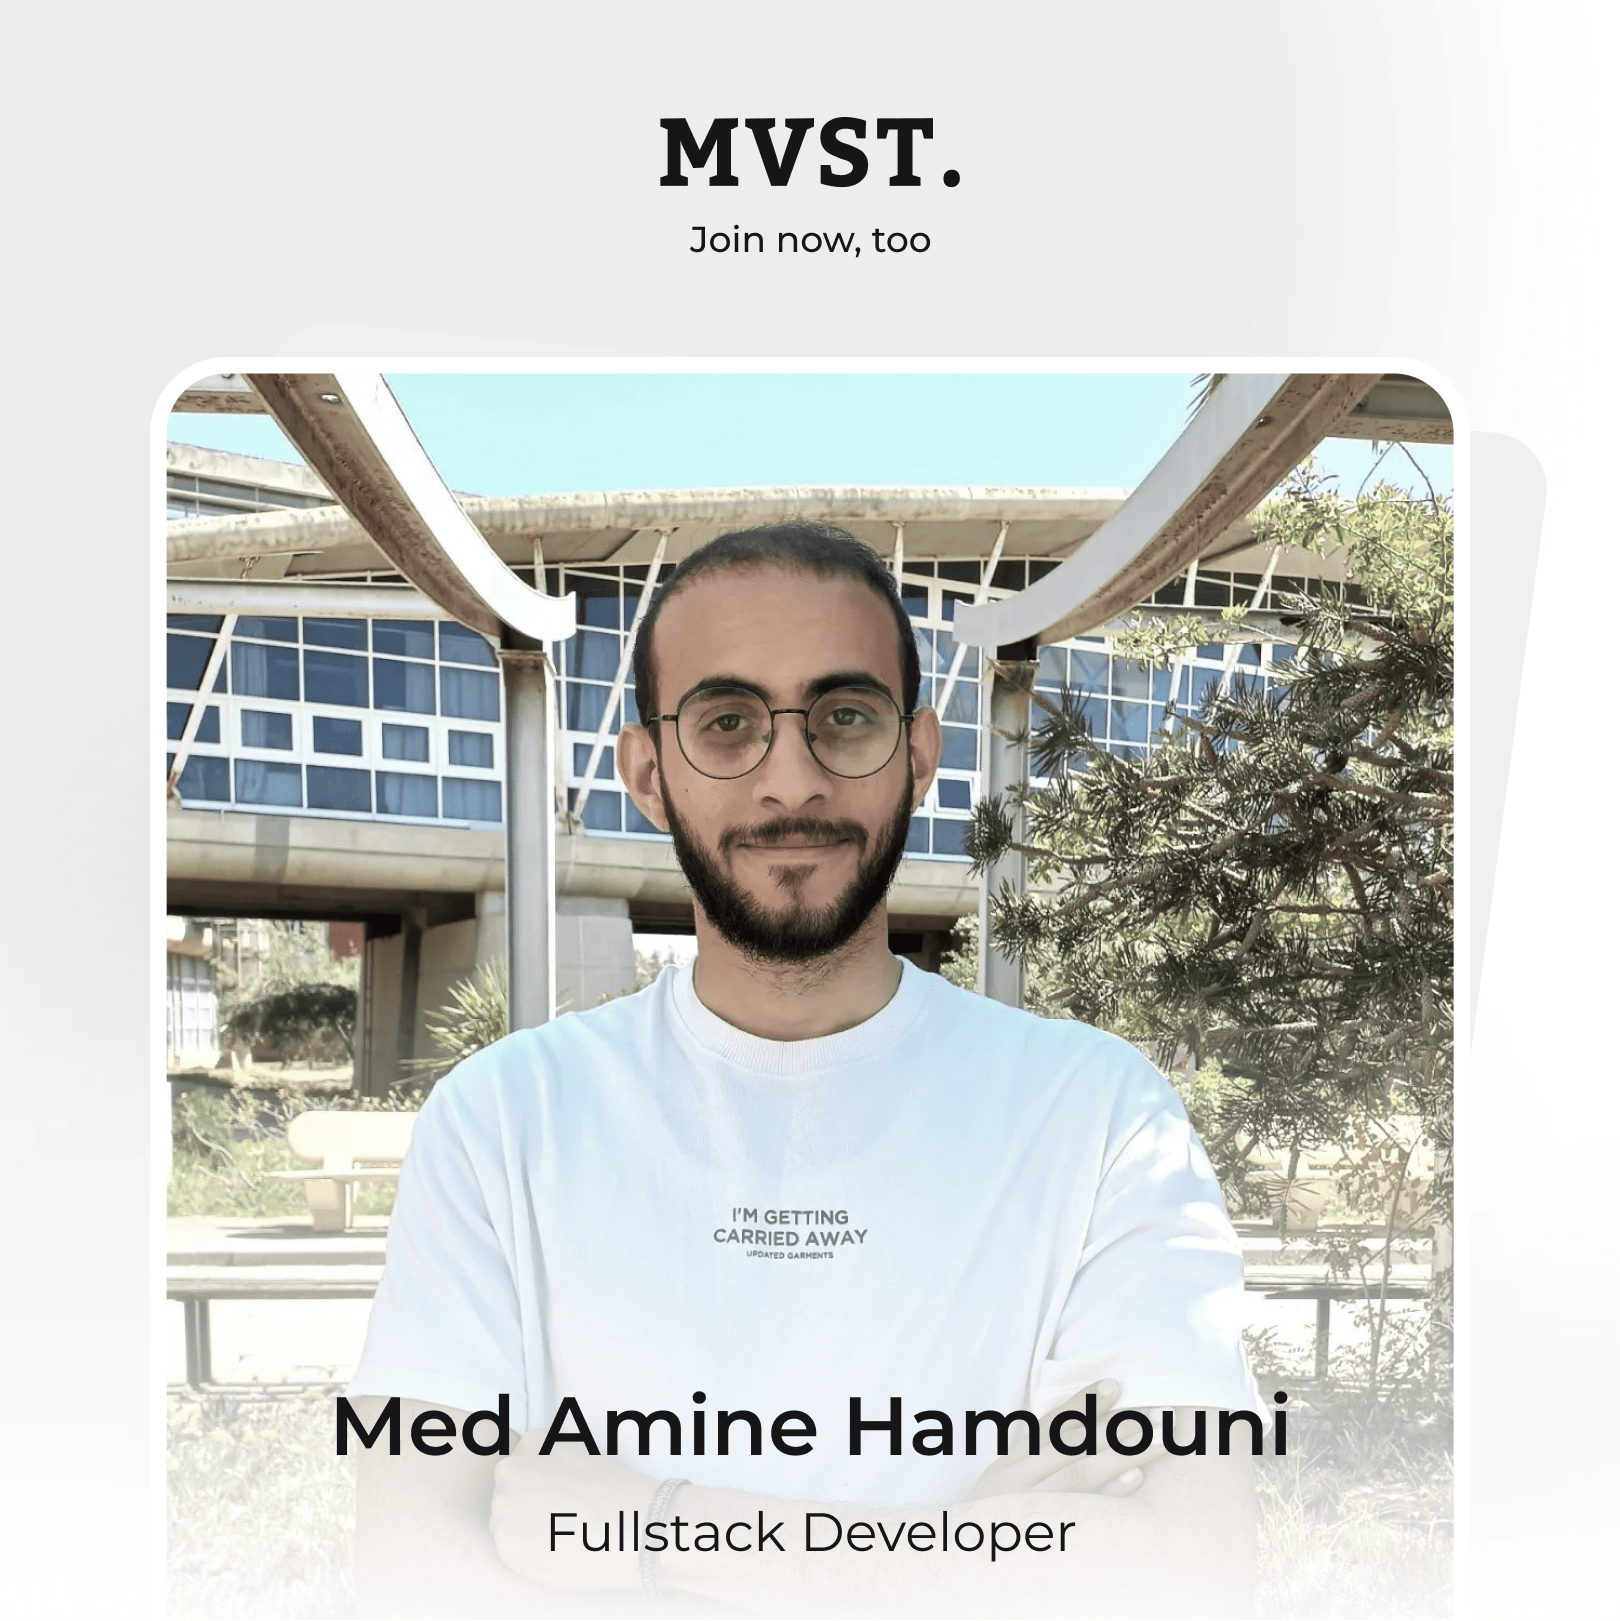 Welcome to MVST, Mohamed!